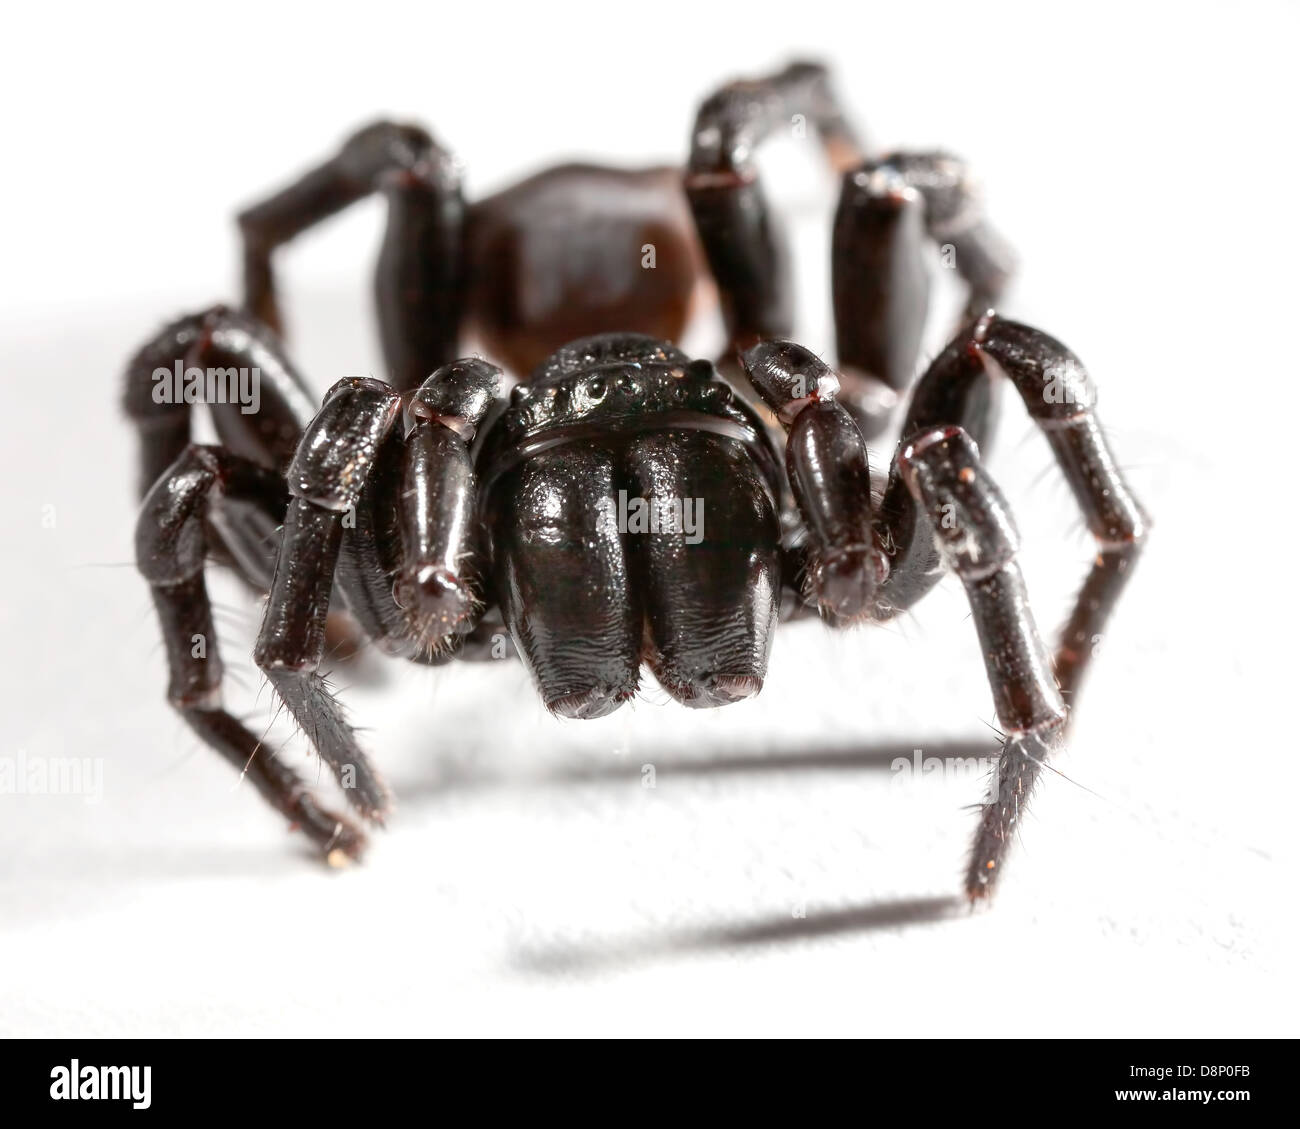 a funnel web spider on white Stock Photo